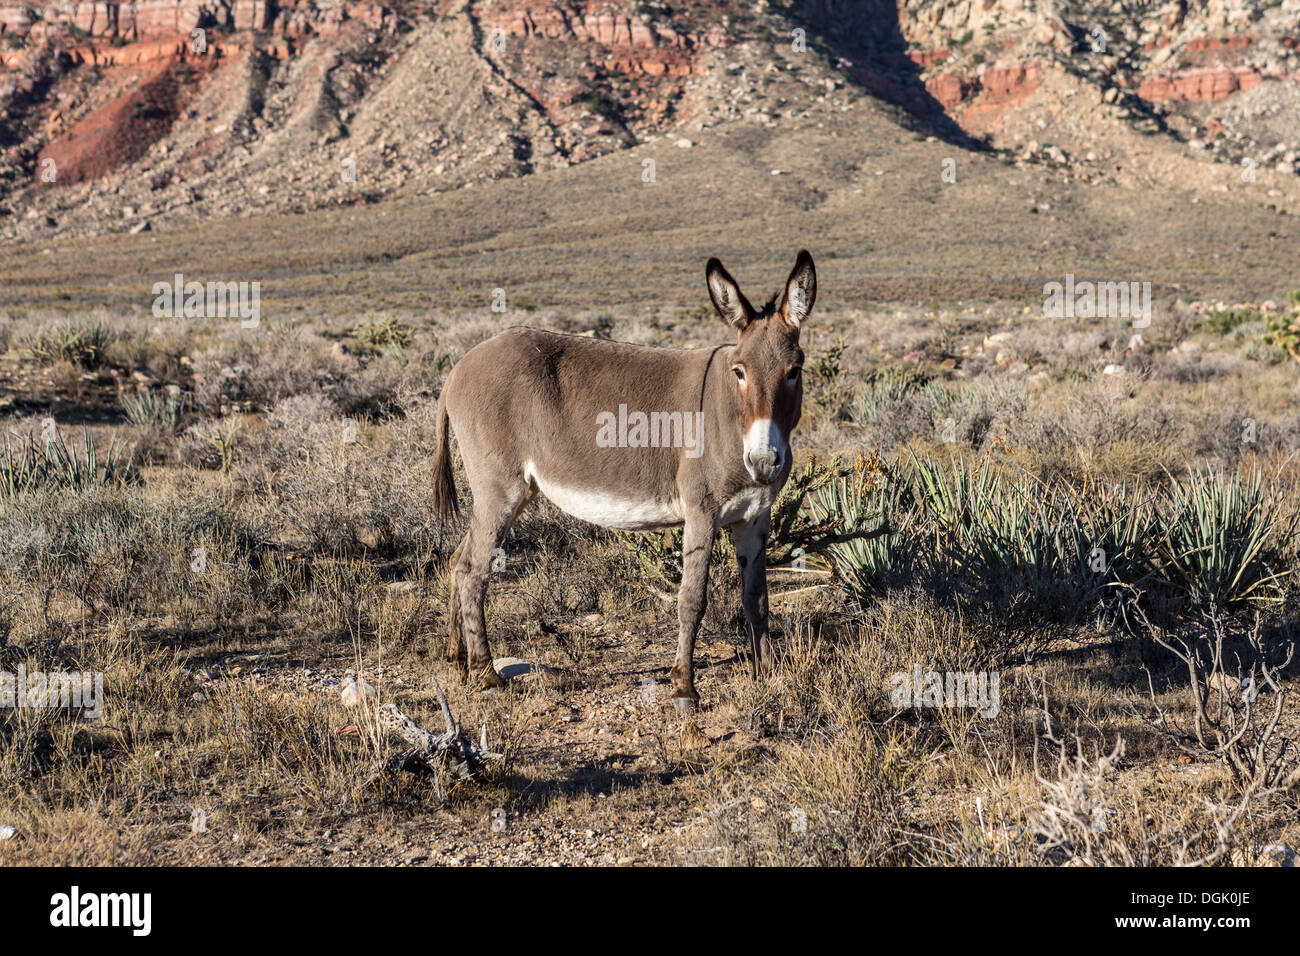 Wild Burro at Red Rock Canyon national Conservation Area in Southern Nevada, USA. Stock Photo